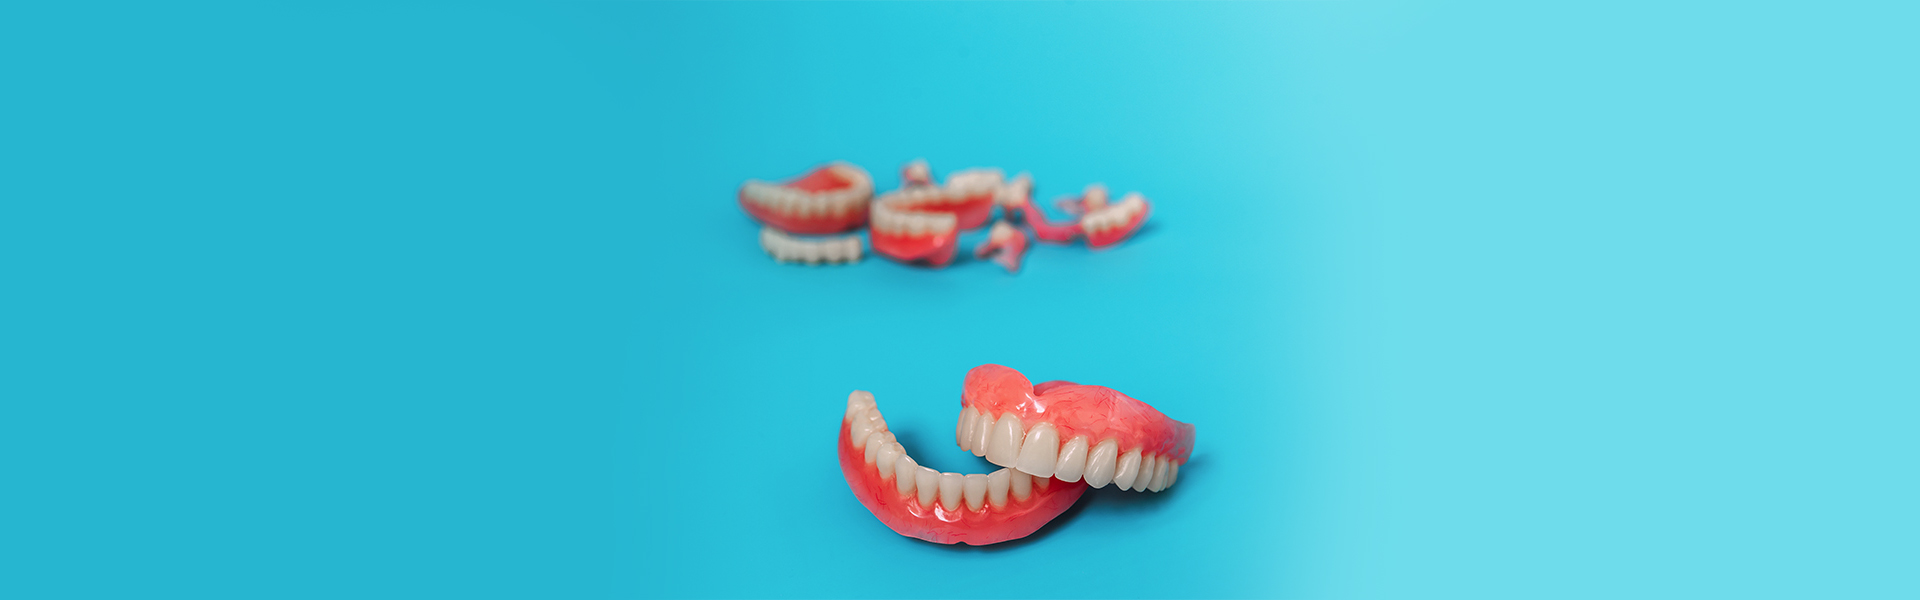 Denture Types Explained: What Is Perfect For You?